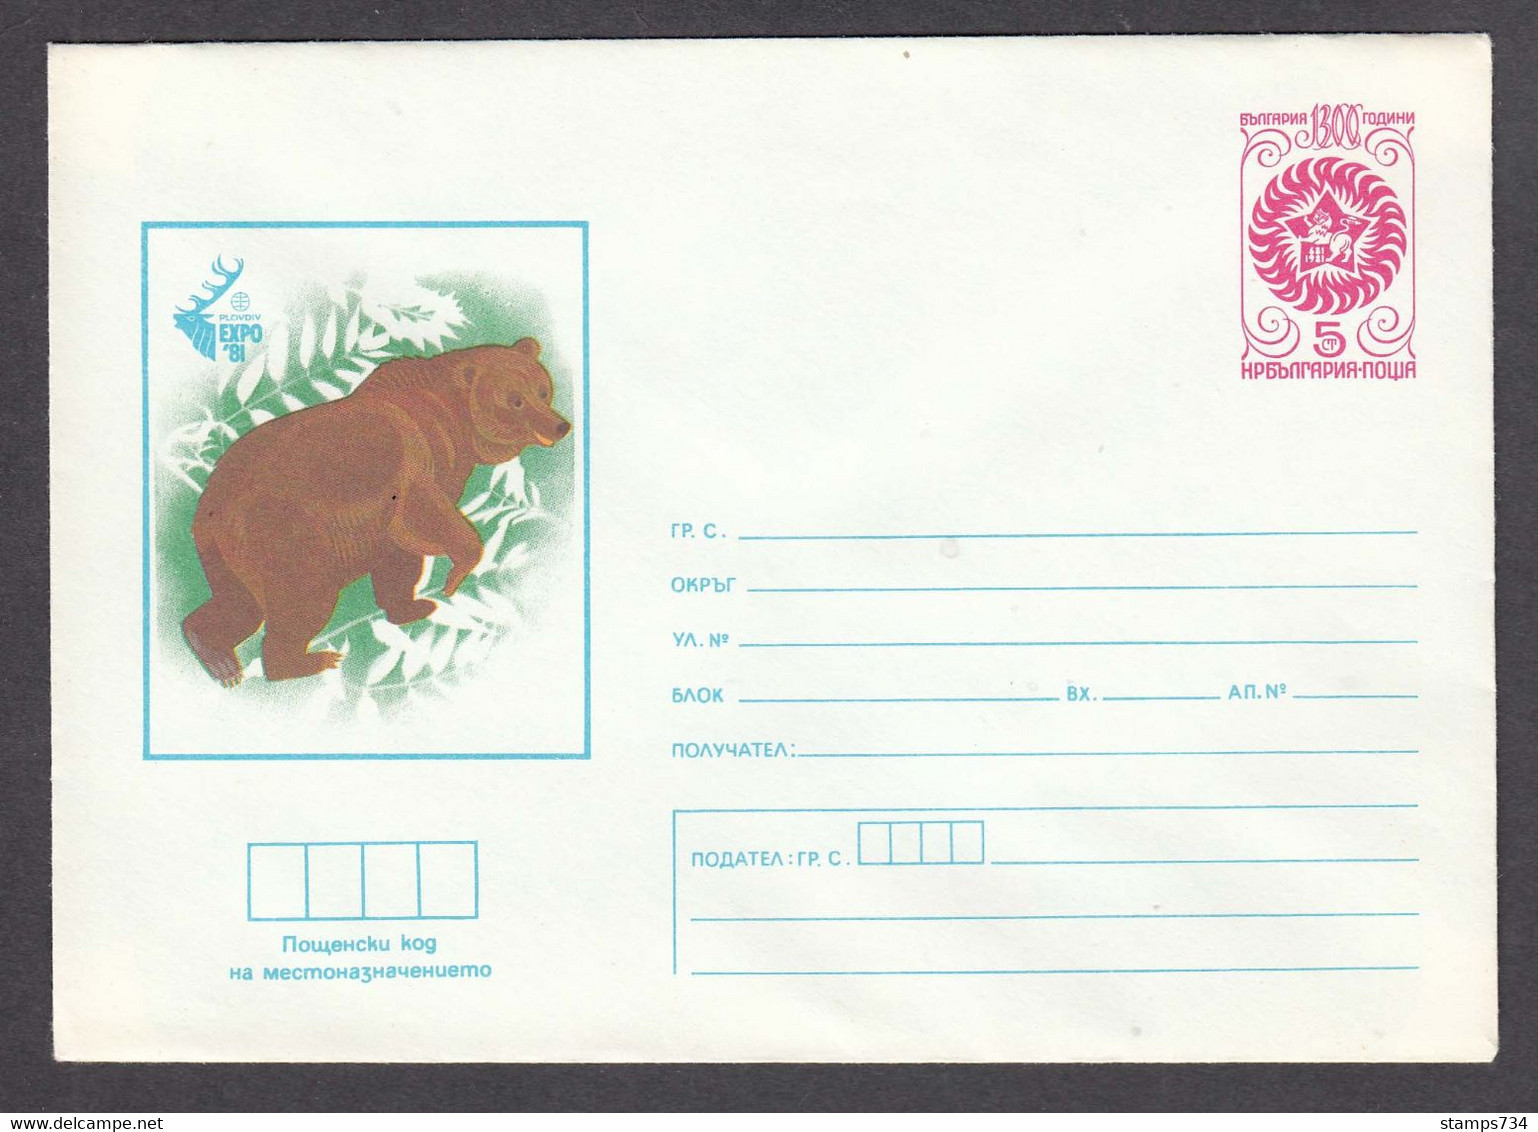 PS 784/1981 - Mint, EXPO'81: Brown Bear, Post. Stationery - Bulgaria - Enveloppes